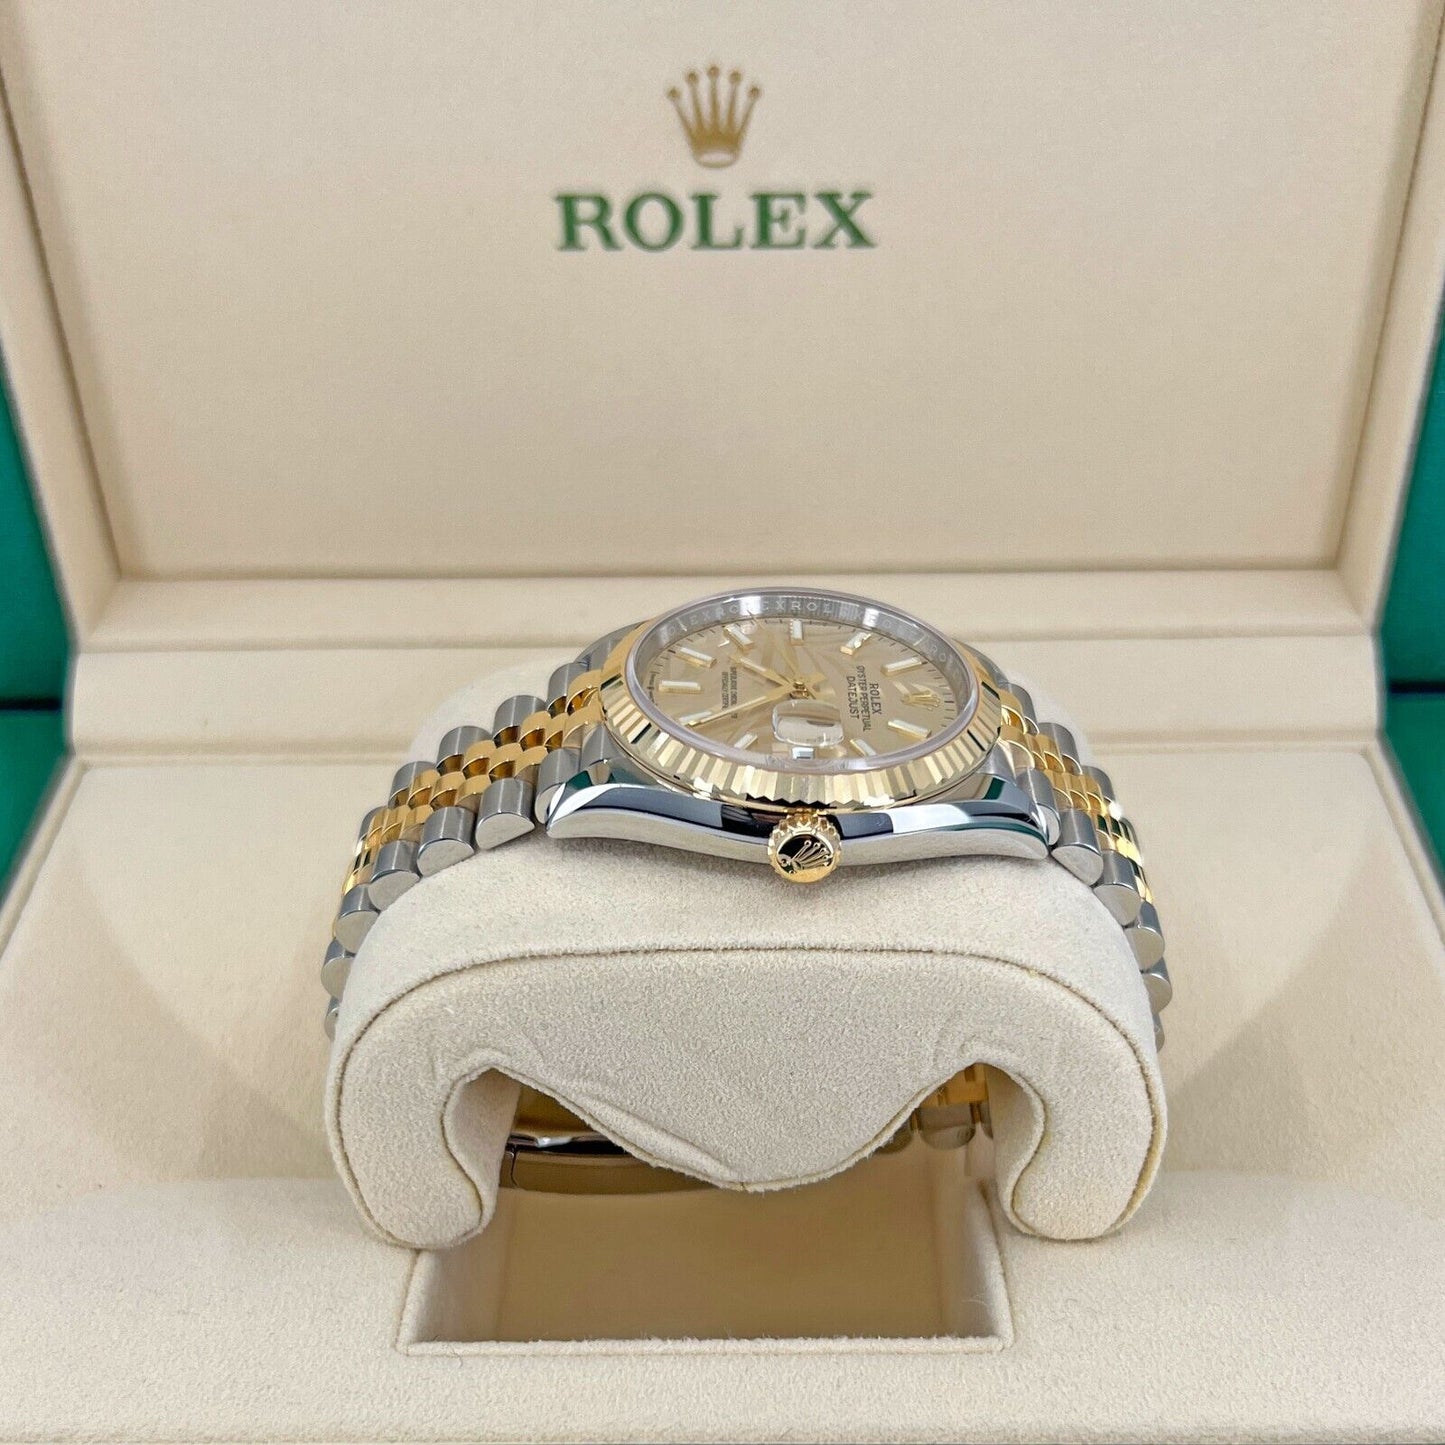 Rolex Datejust 36, 18k Yellow Gold and Stainless Steel, 36mm, Golden, palm motif dial, Ref# 126233-0037, Right